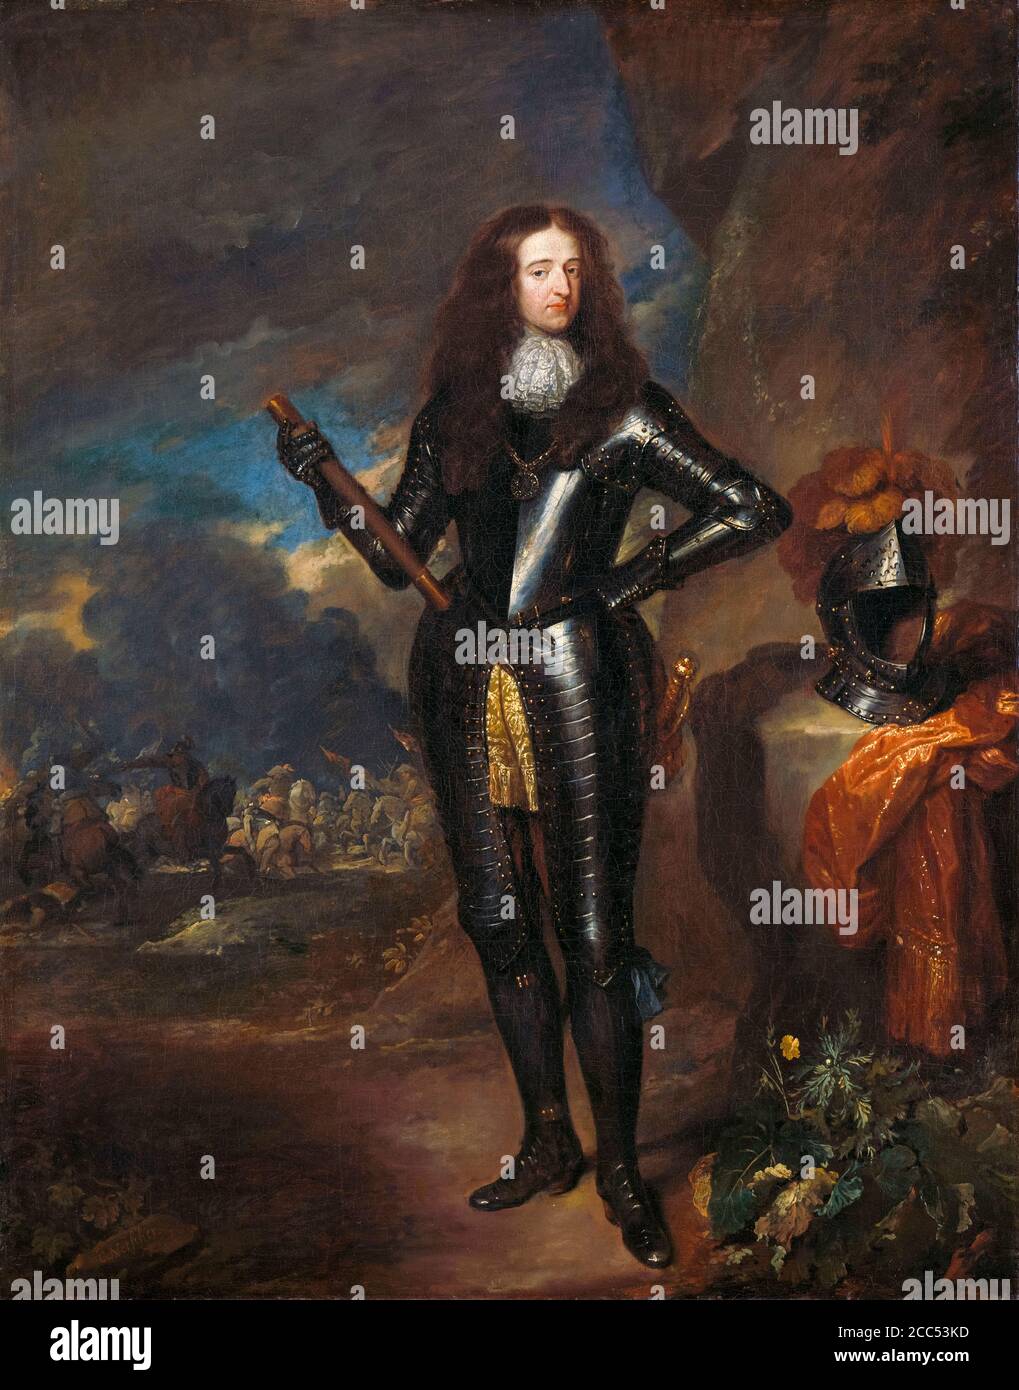 William III (1650-1702), Prince of Orange and King of England (1689-1702), in full armour, portrait painting by Caspar Netscher, 1680-1684 Stock Photo